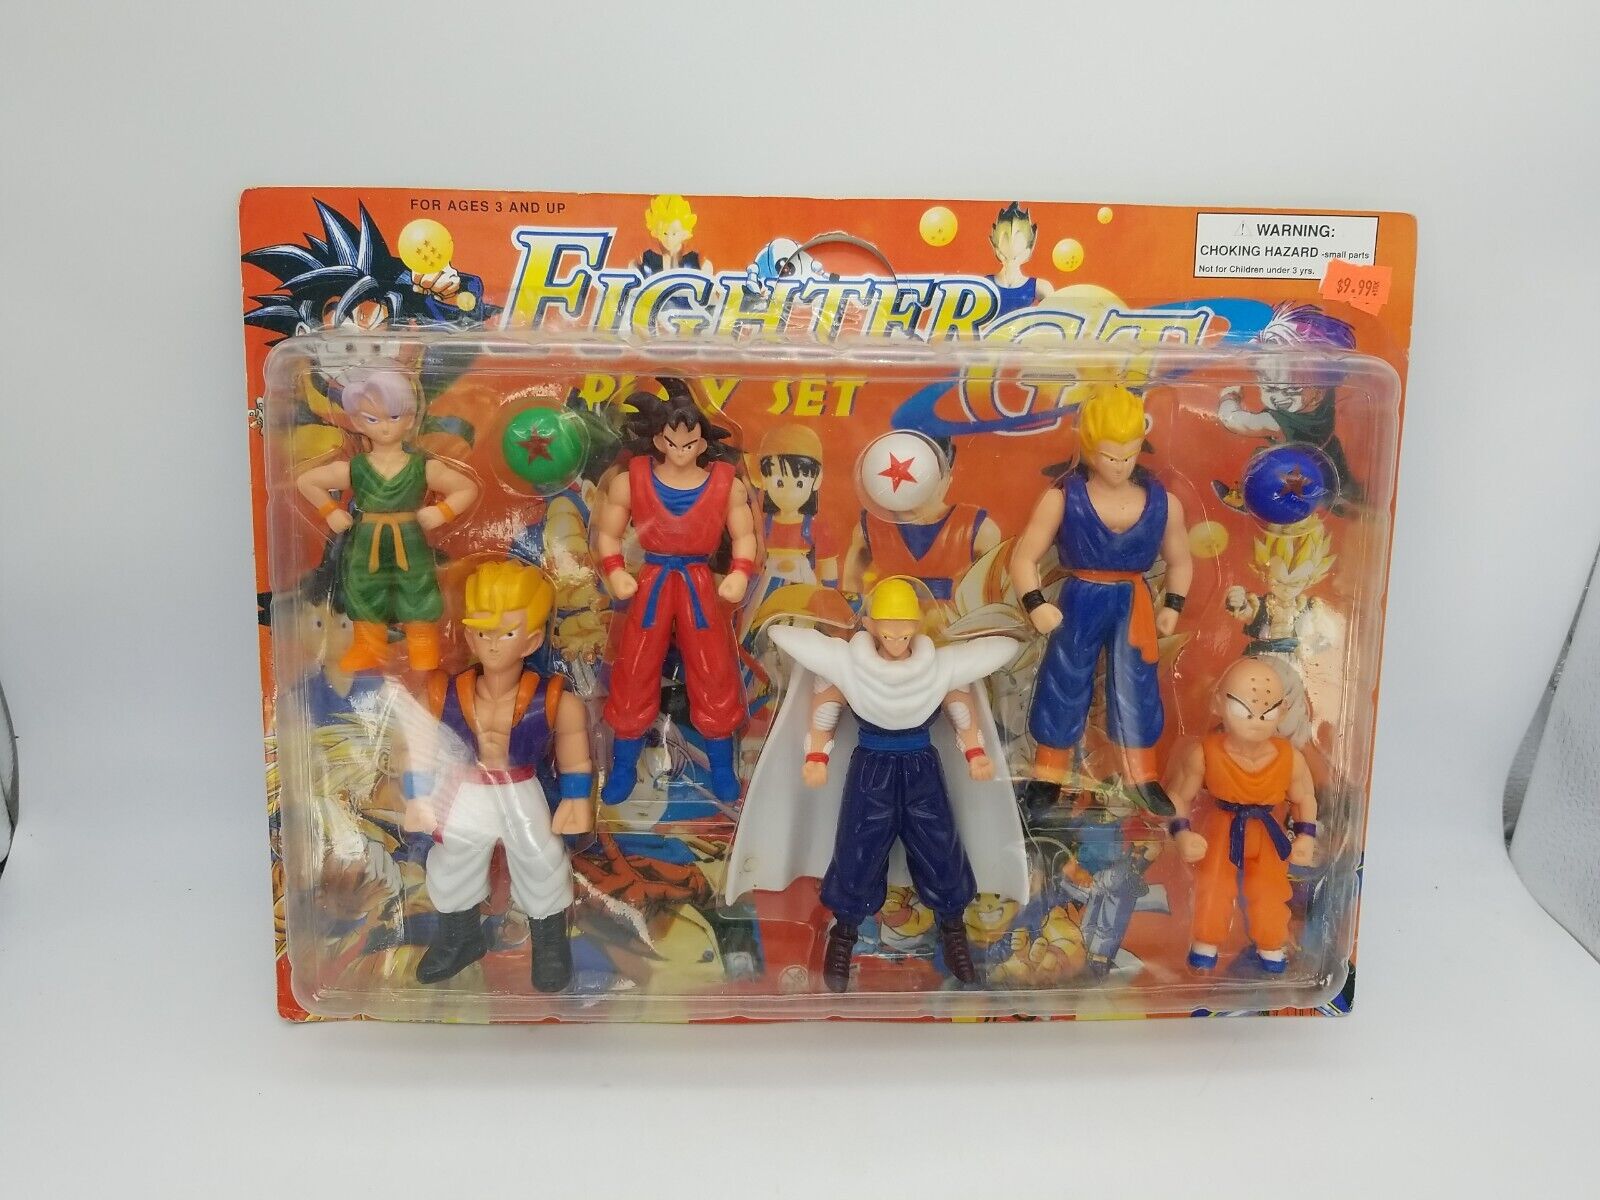 FIGHTER GT PLAY SET - DRAGON BALL GT KNOCK OFF Sealed - 6 FIGURES New SEALED 